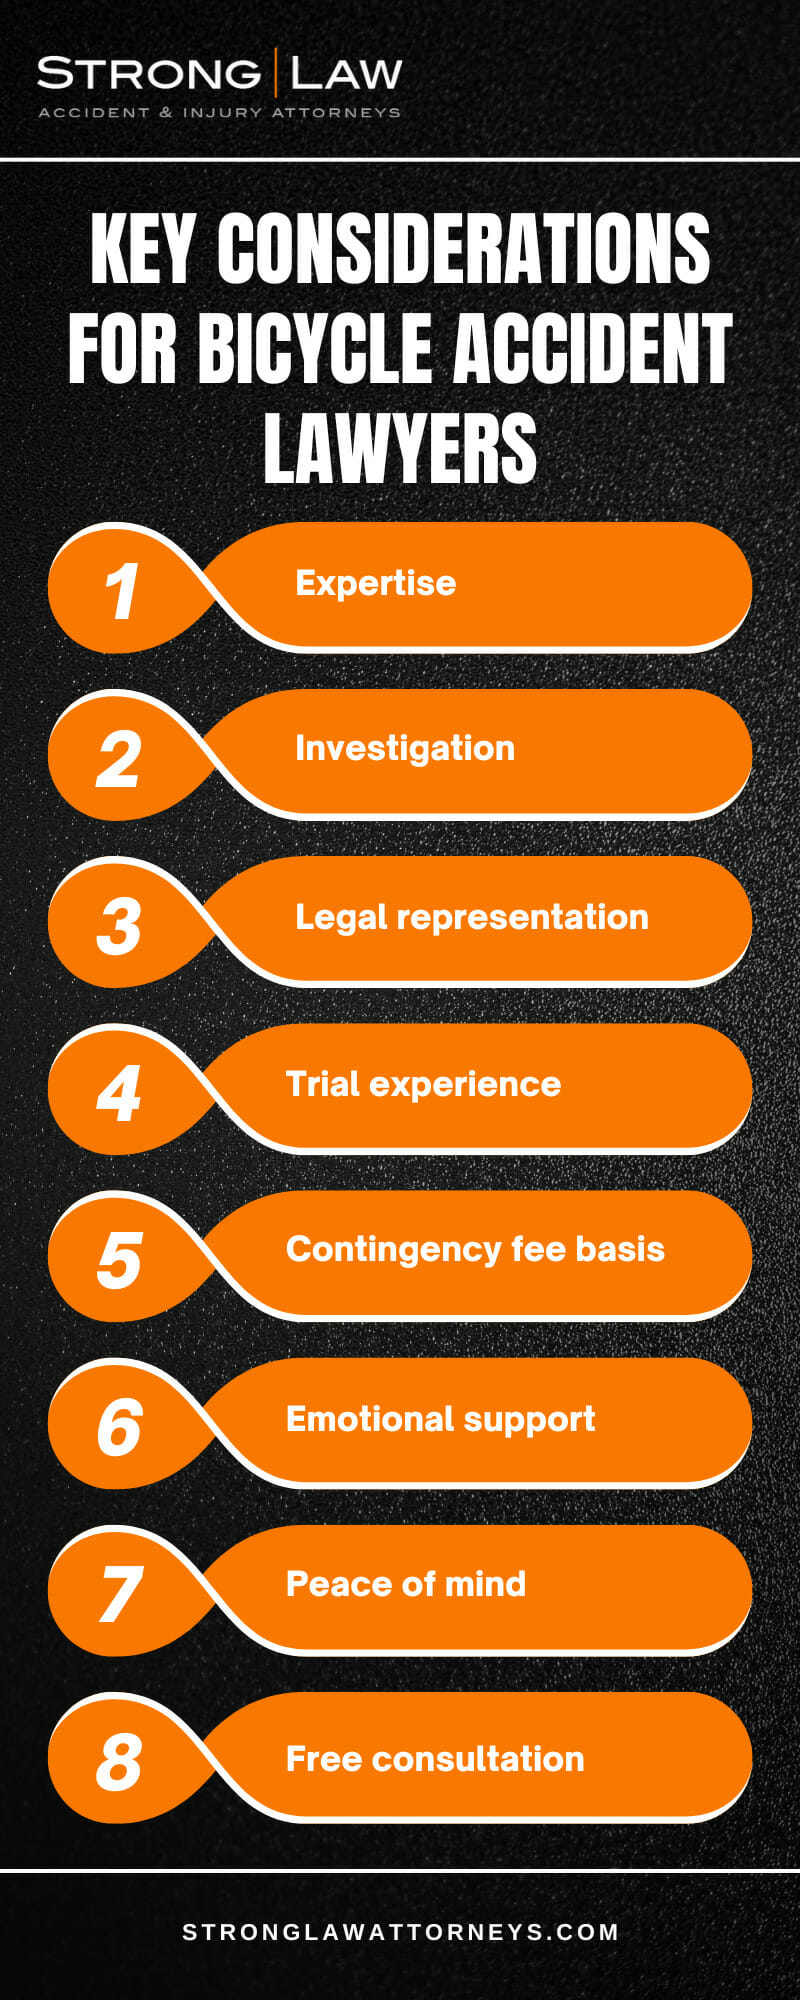 Key Considerations For Bicycle Accident Lawyers Infographic